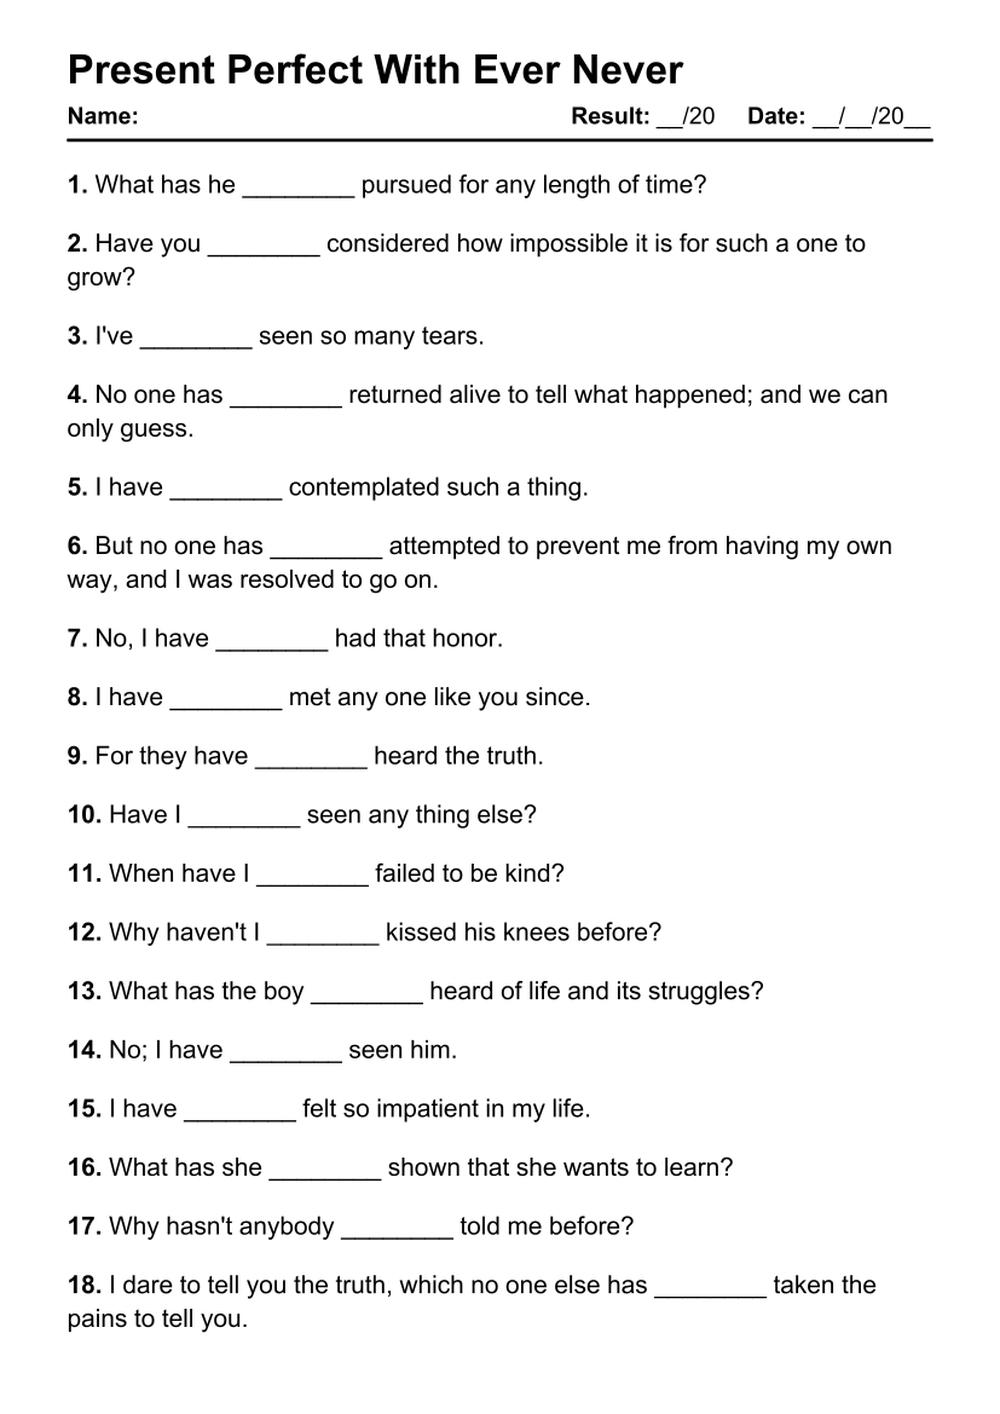 Printable Present Perfect With Ever Never Exercises - PDF Worksheet with Answers - Test 16